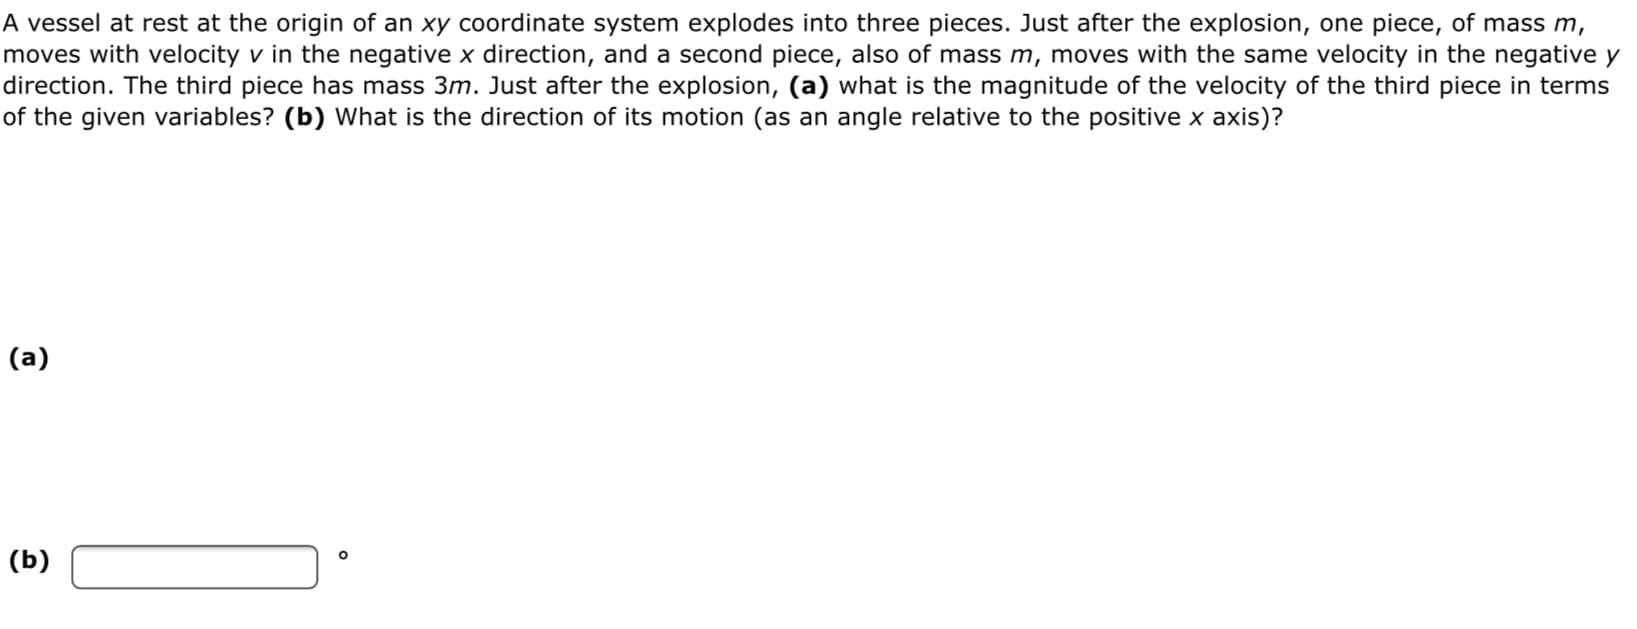 A vessel at rest at the origin of an xy coordinate system explodes into three pieces. Just after the explosion, one piece, of mass m,
moves with velocity v in the negative x direction, and a second piece, also of mass m, moves with the same velocity in the negative y
direction. The third piece has mass 3m. Just after the explosion, (a) what is the magnitude of the velocity of the third piece in terms
of the given variables? (b) What is the direction of its motion (as an angle relative to the positive x axis)?
(a)
(b)
